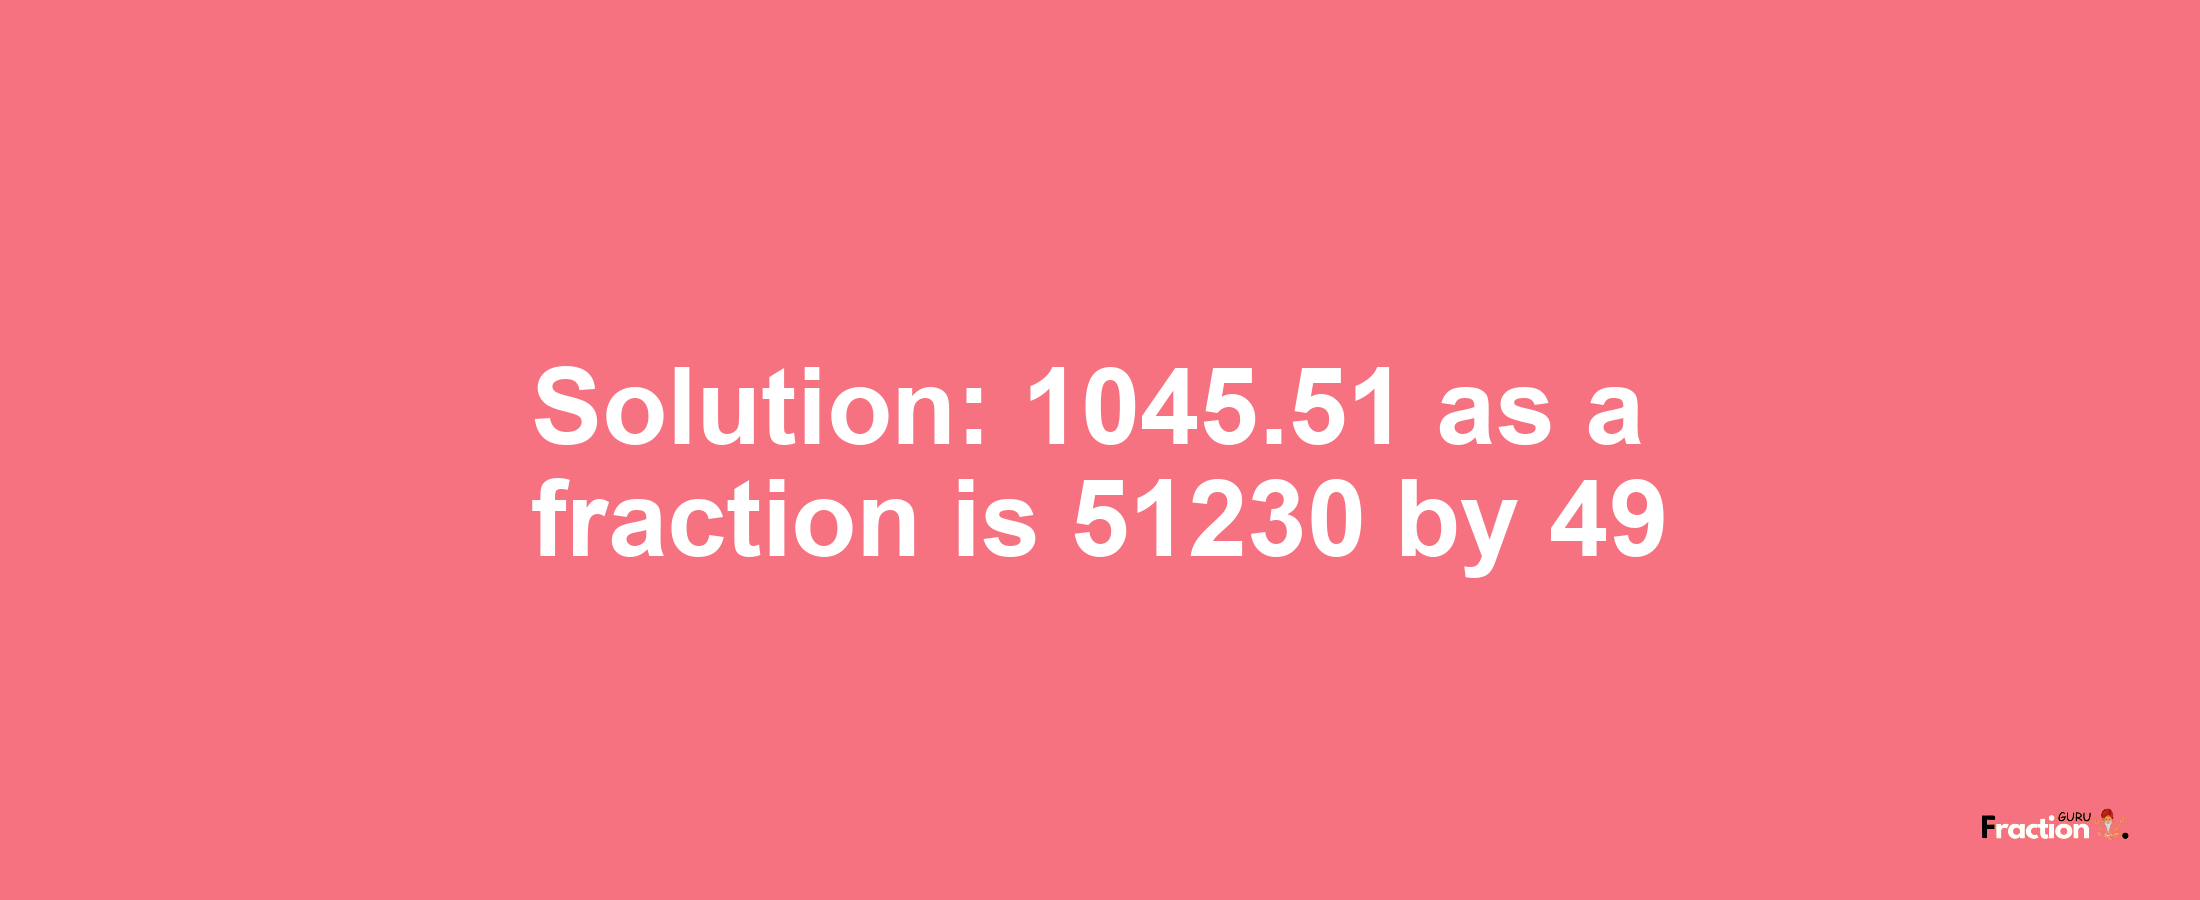 Solution:1045.51 as a fraction is 51230/49